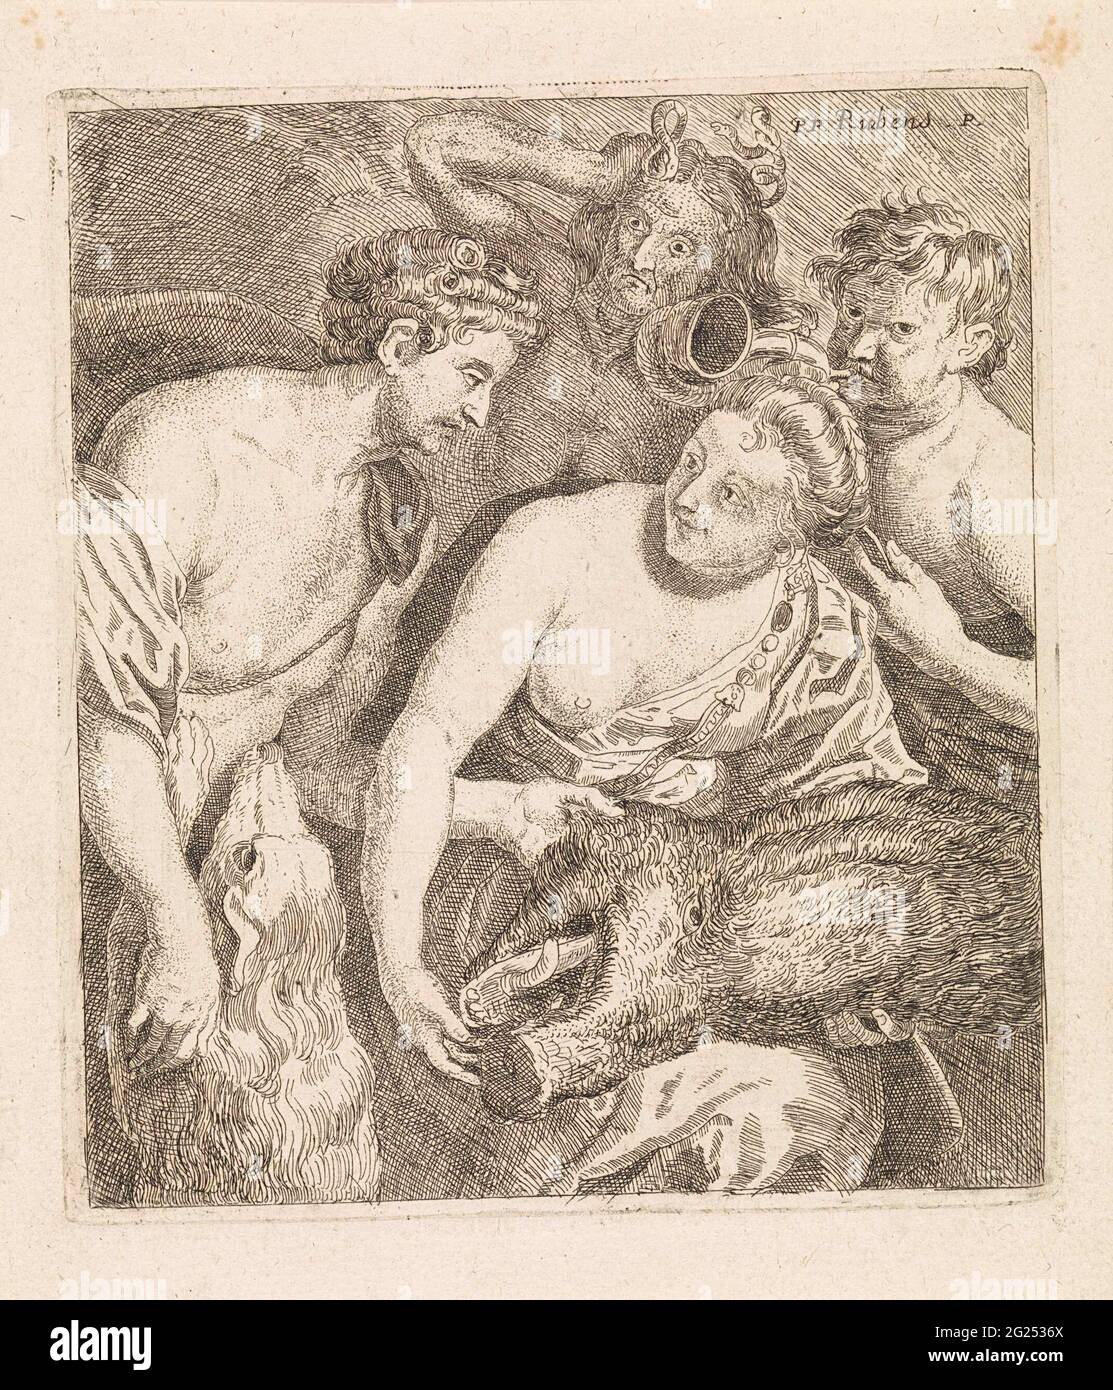 Meleager gives the head of the Caledonian boar to Atalanta. Meleager offers Atalanta the head of the wild boar. A hunting dog jumps up against meleurer, in the background a boy blows the hunting horn. In the background is one of the Furiën, as a harbinger of the tragic end of Meleager. Stock Photo